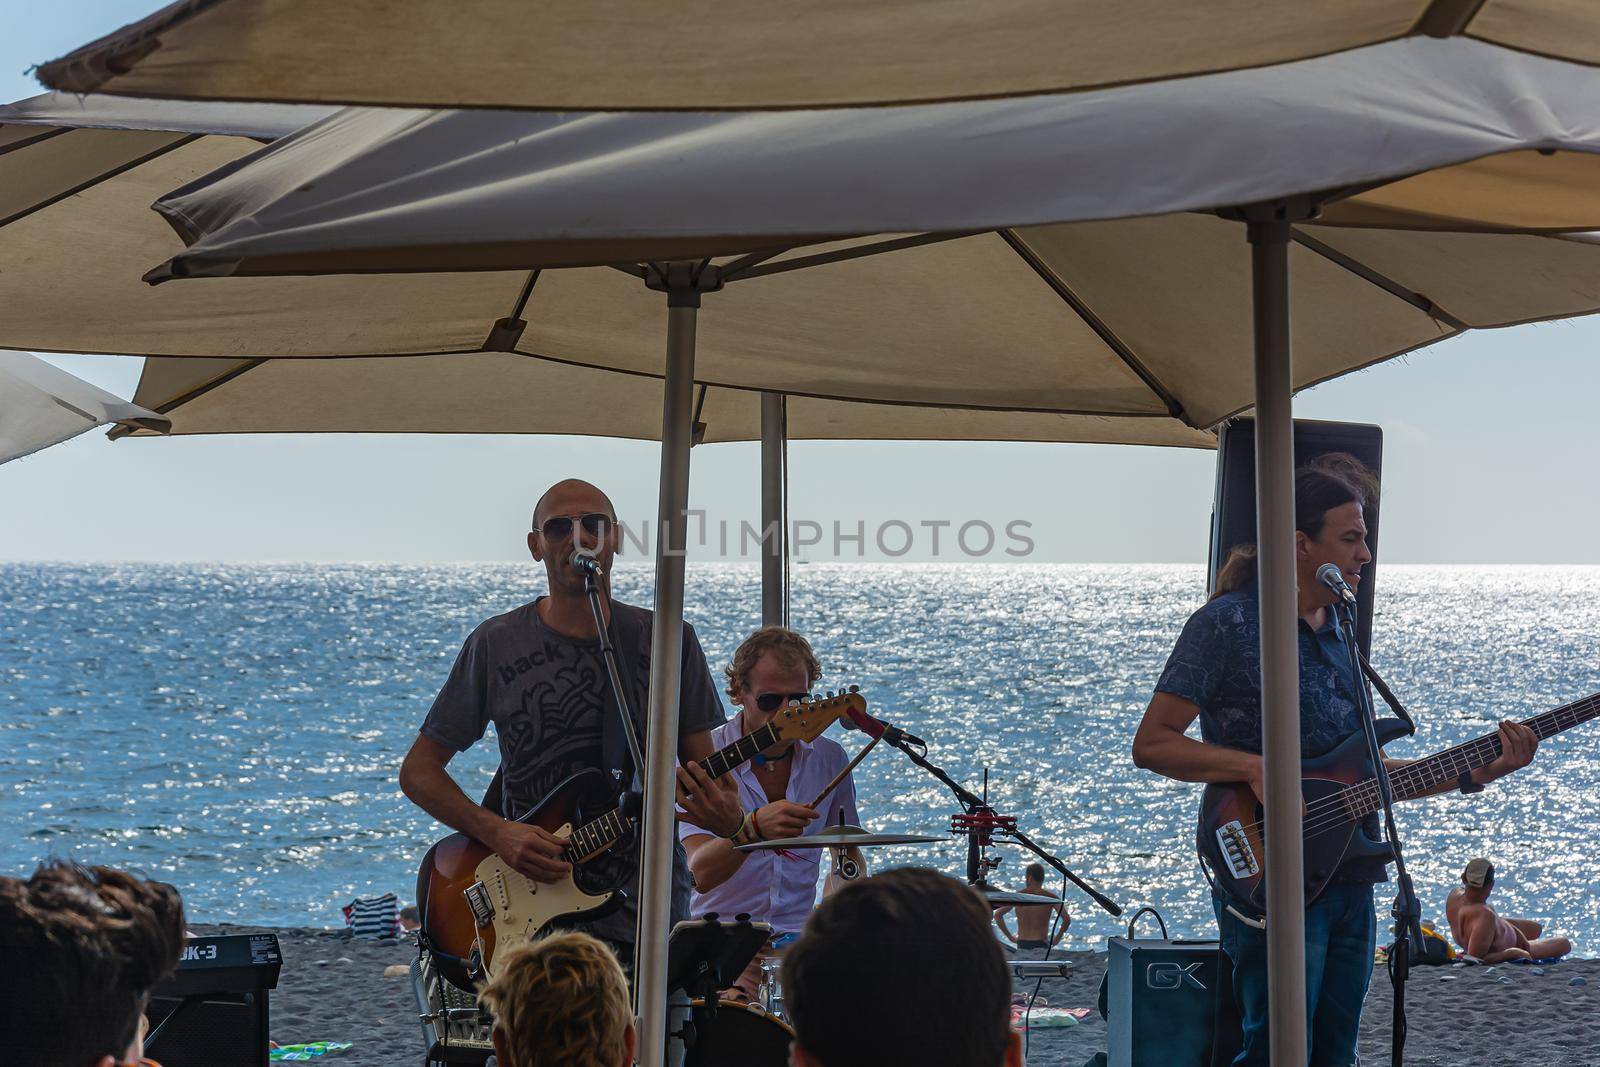 Spain, Tenerife - 09/17/2016: performance by a musical group on the ocean by Grommik